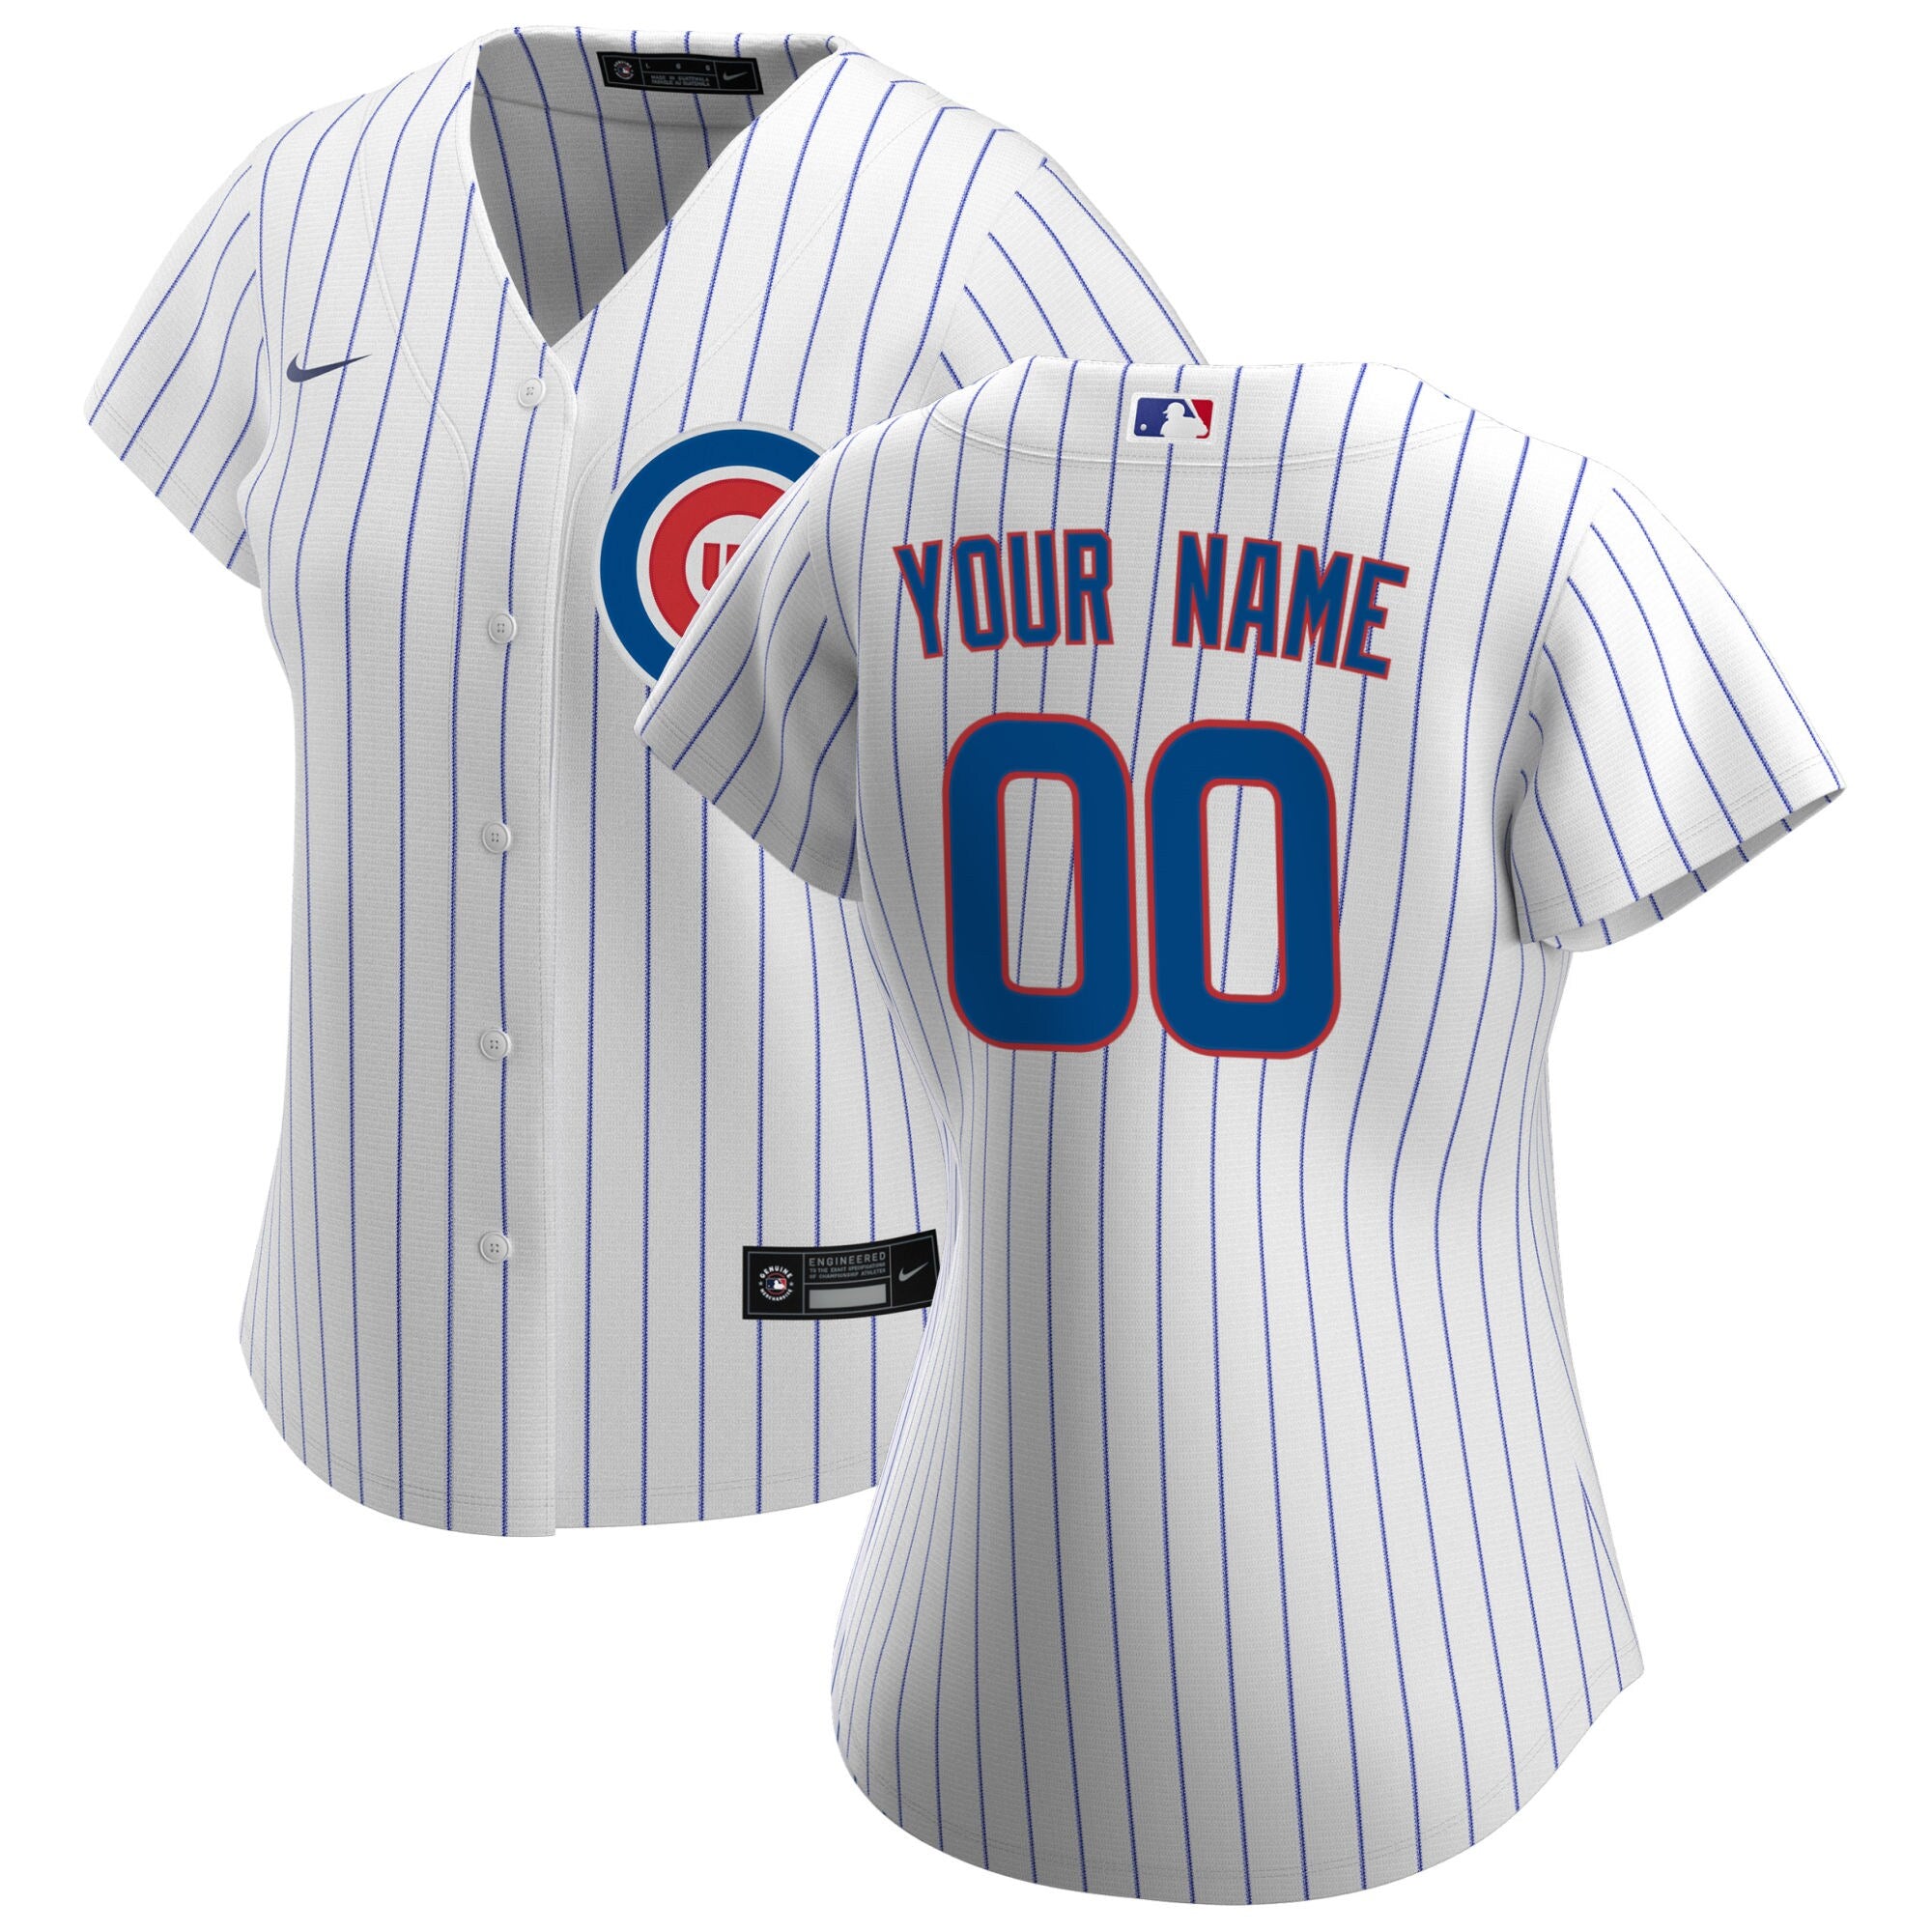 Nike Men's Chicago Cubs White Home Replica Jersey XL